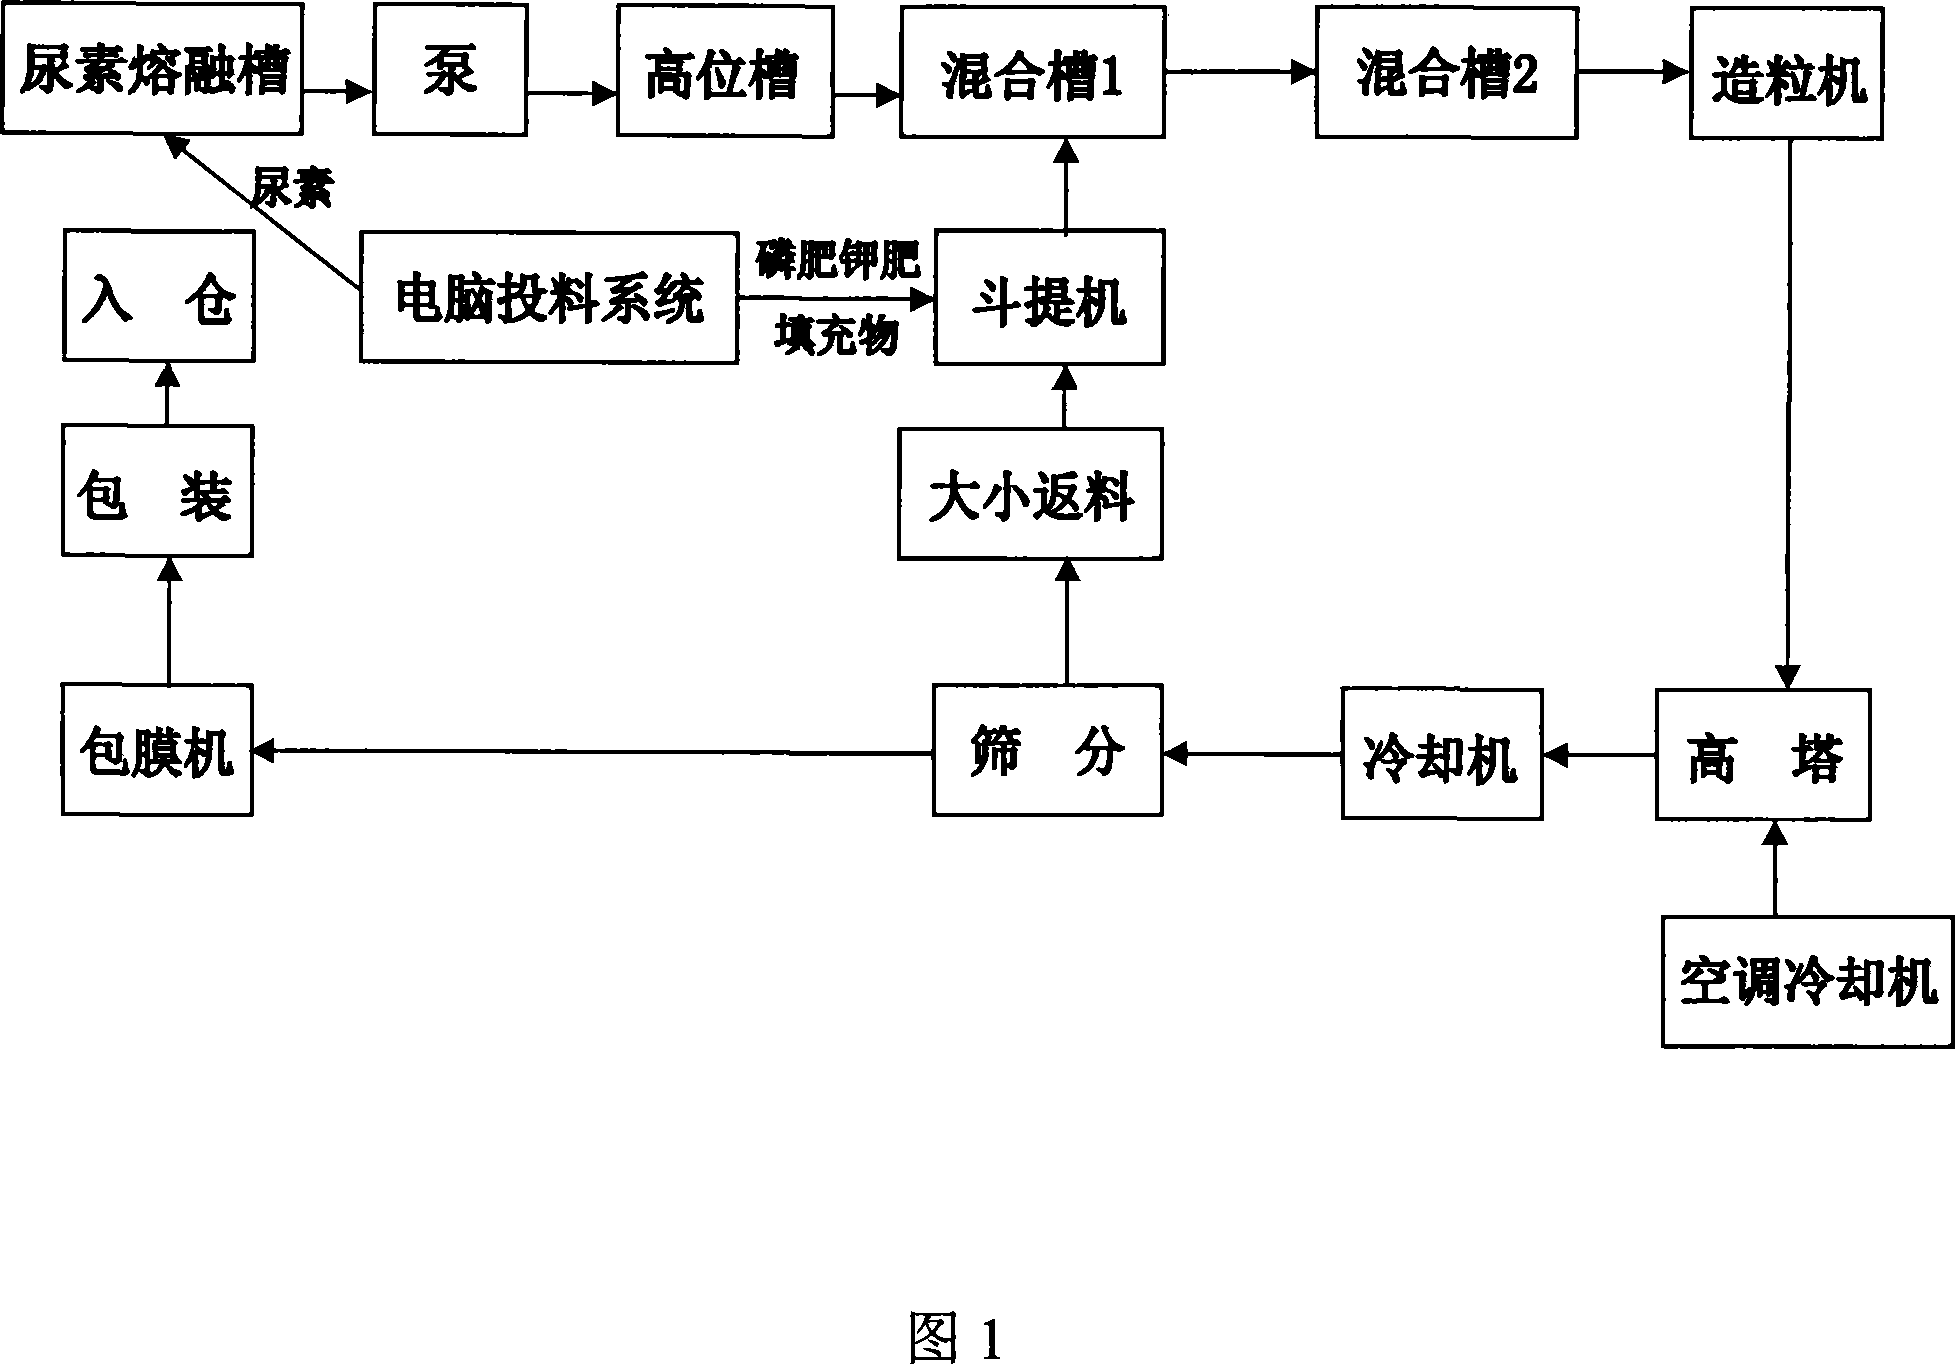 Process for producing compound fertilizer by tower granulation